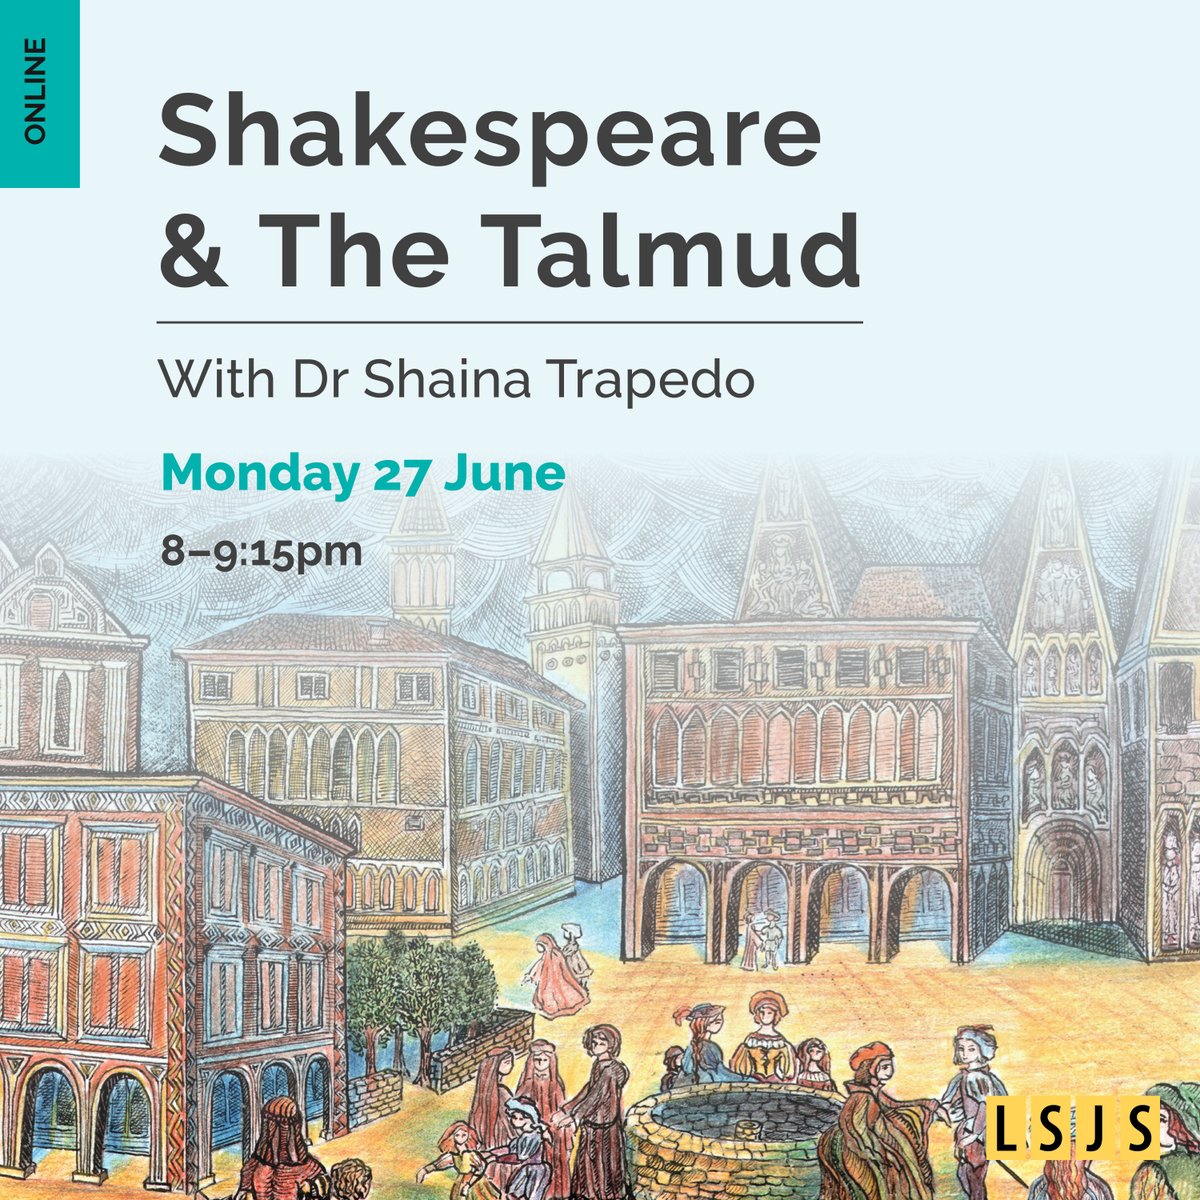 What did Shakespeare & his 16th-century contemporaries know about the Talmud?

Join Dr Shaina Trapedo, expert on early modern literature & religious studies, for Shakespeare & the Talmud on 27 June at 8pm (UK) - an event not to be missed!

lsjs.ac.uk/shakespeare-th…

@ShainaTrapedo